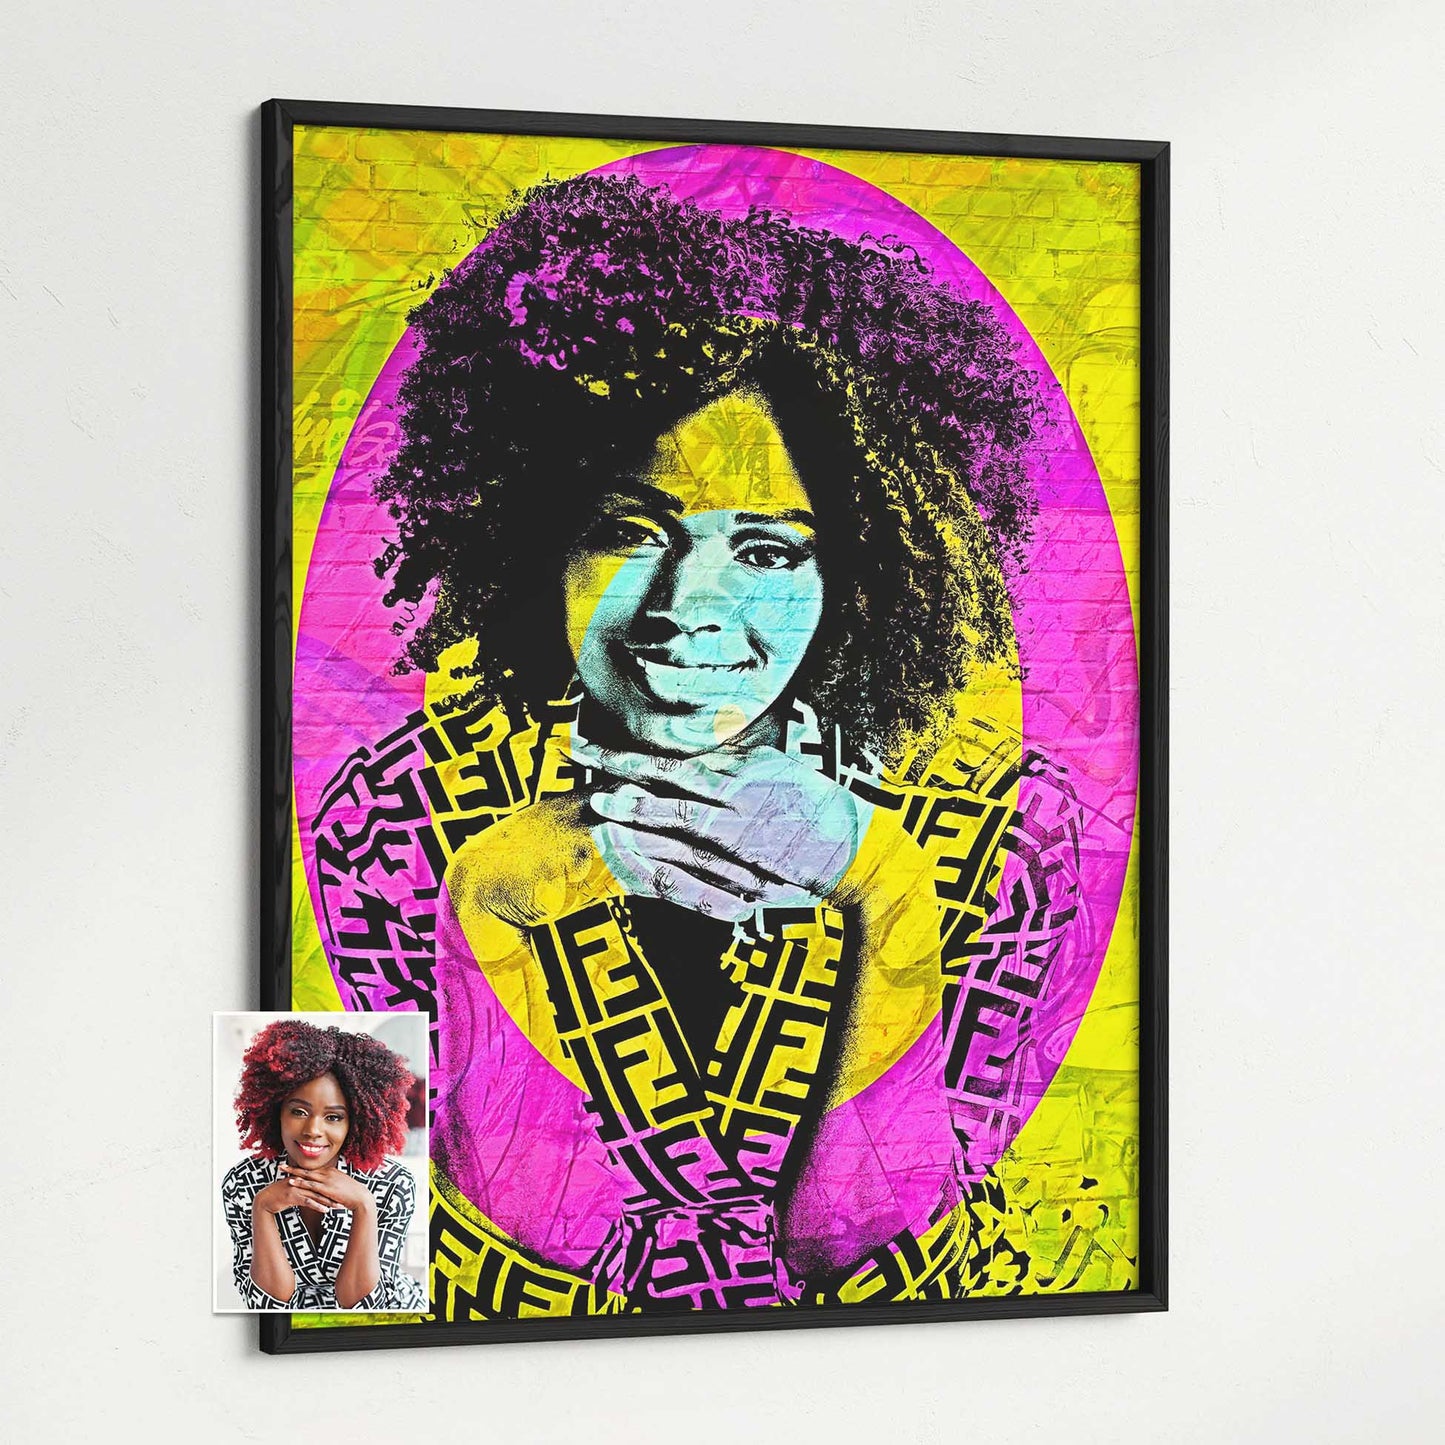 Transform your space into an urban oasis with our Personalised Graffiti Street Art Print. The city-style brick texture and vibrant colors, such as pink, yellow, and blue, create a cool and chic atmosphere. Crafted by printing from photo